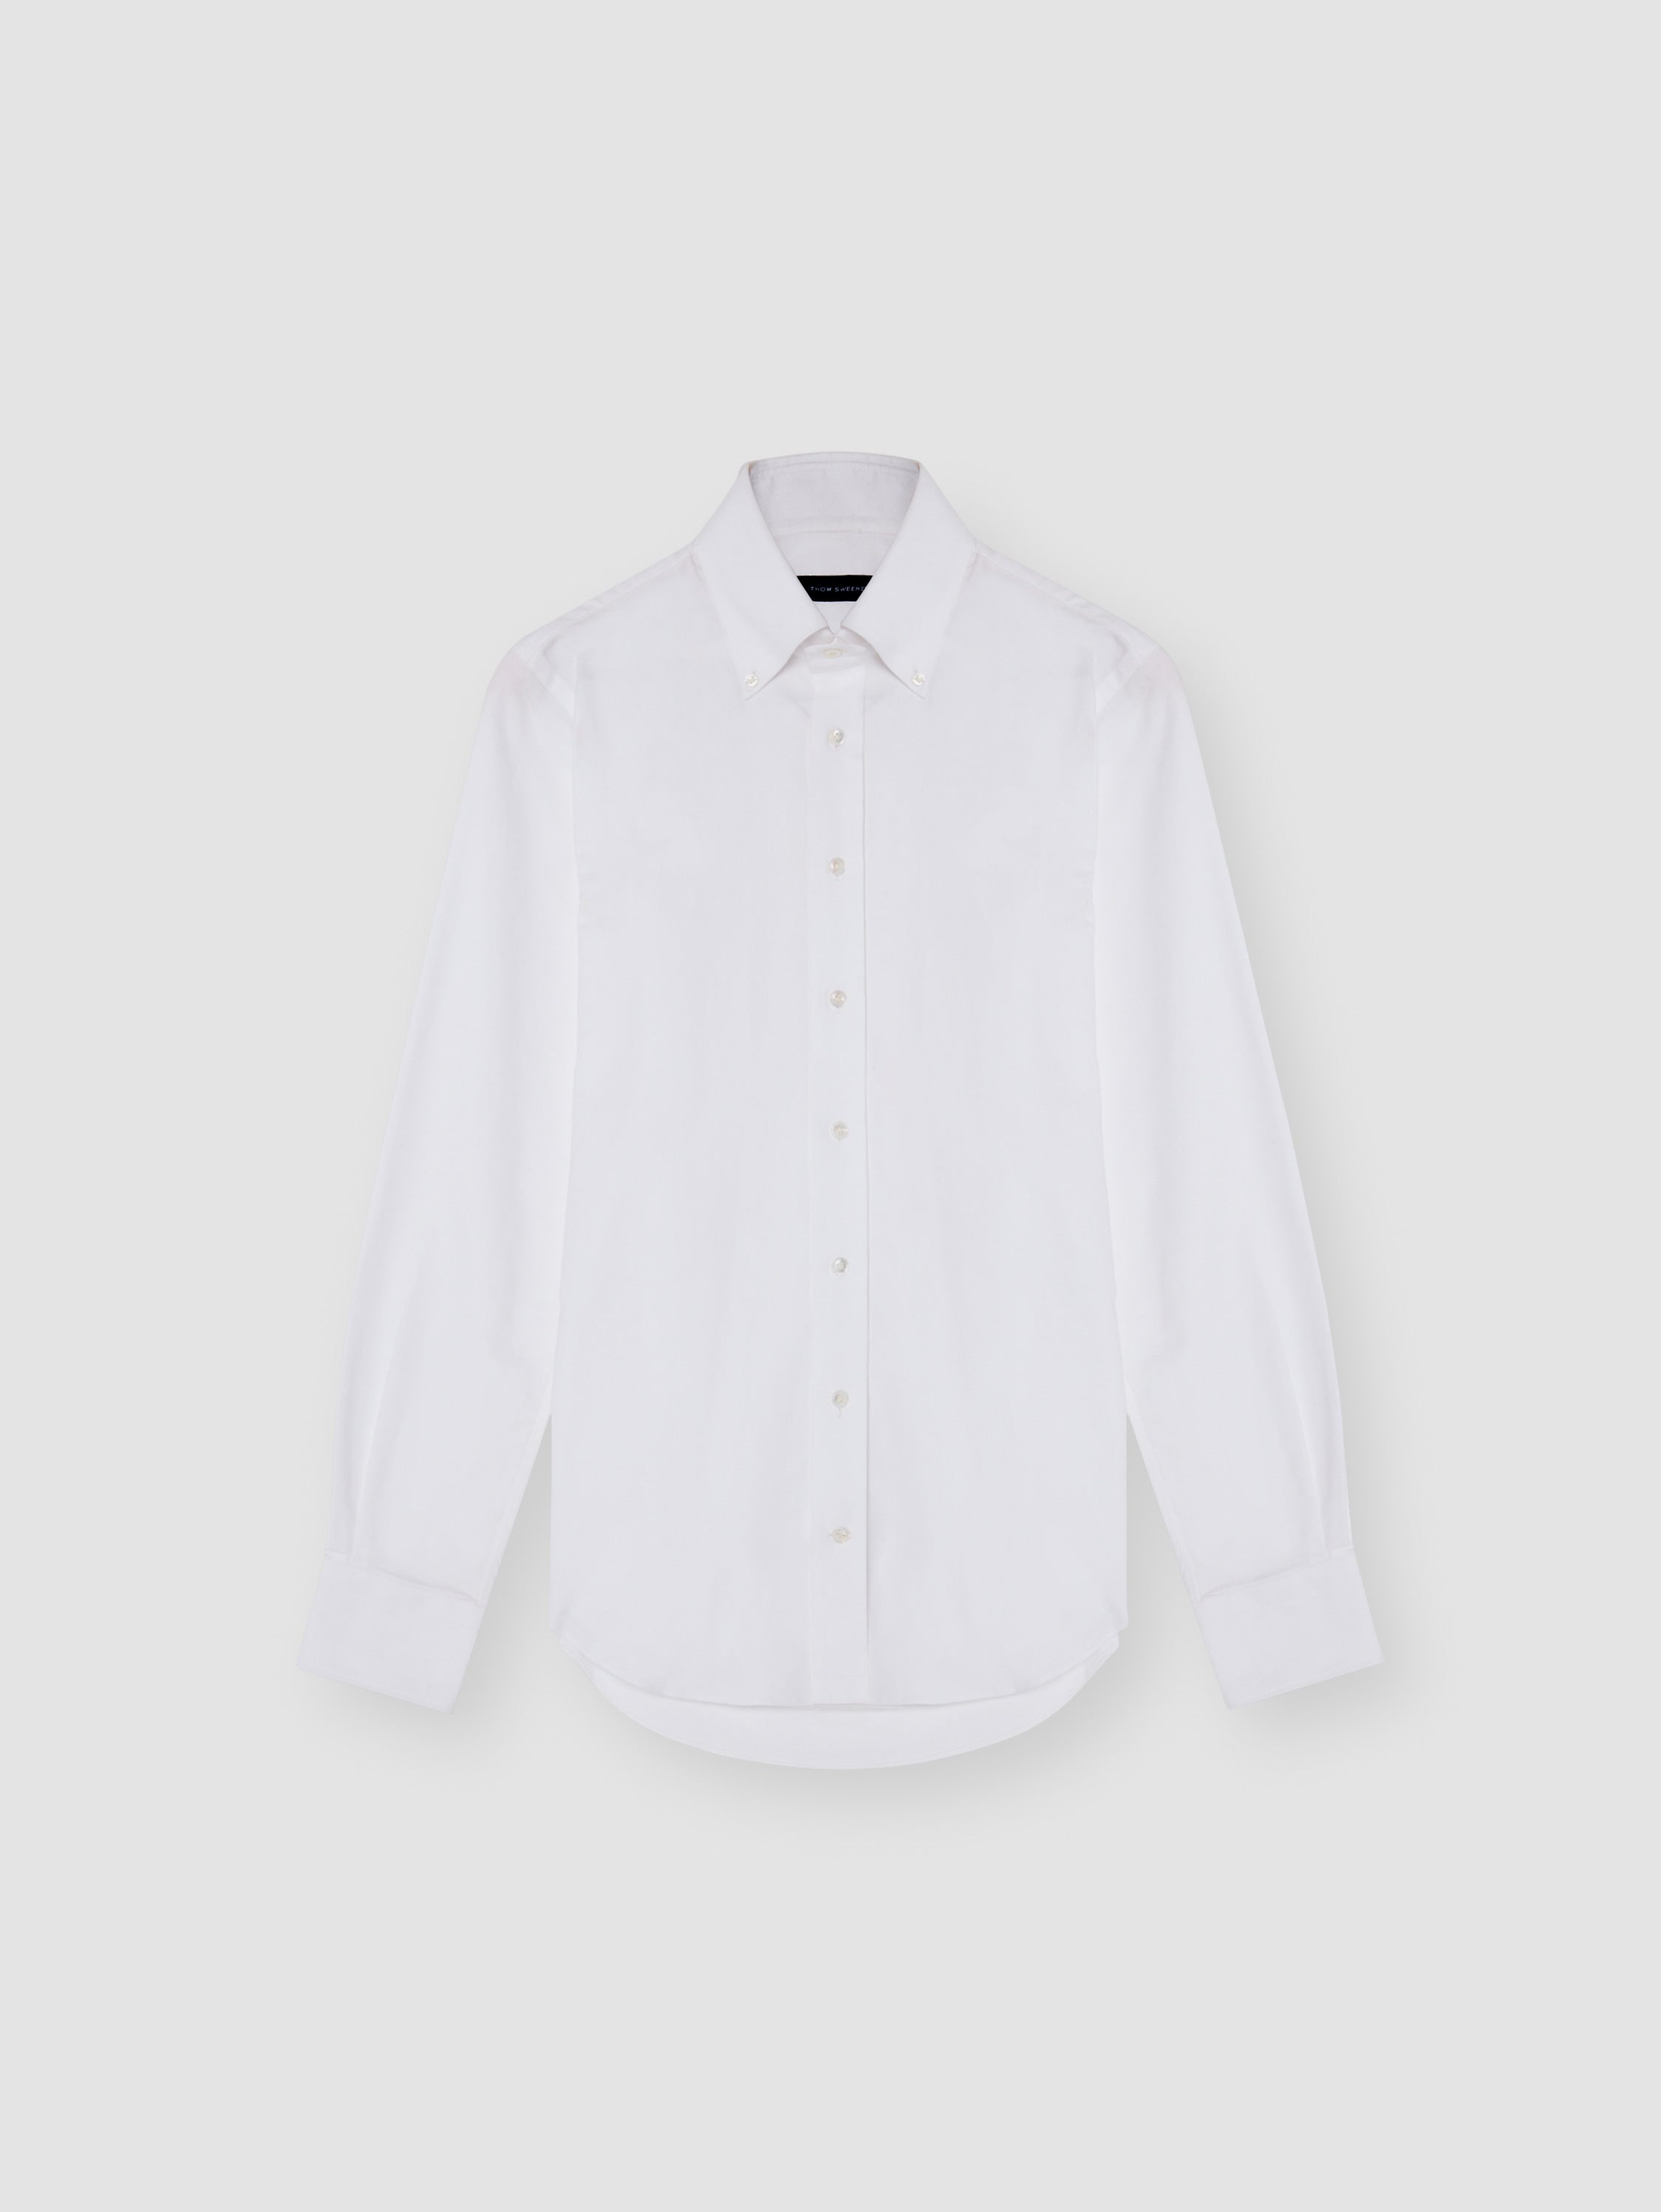 Casual Button Down Cotton Oxford Shirt White Product Image